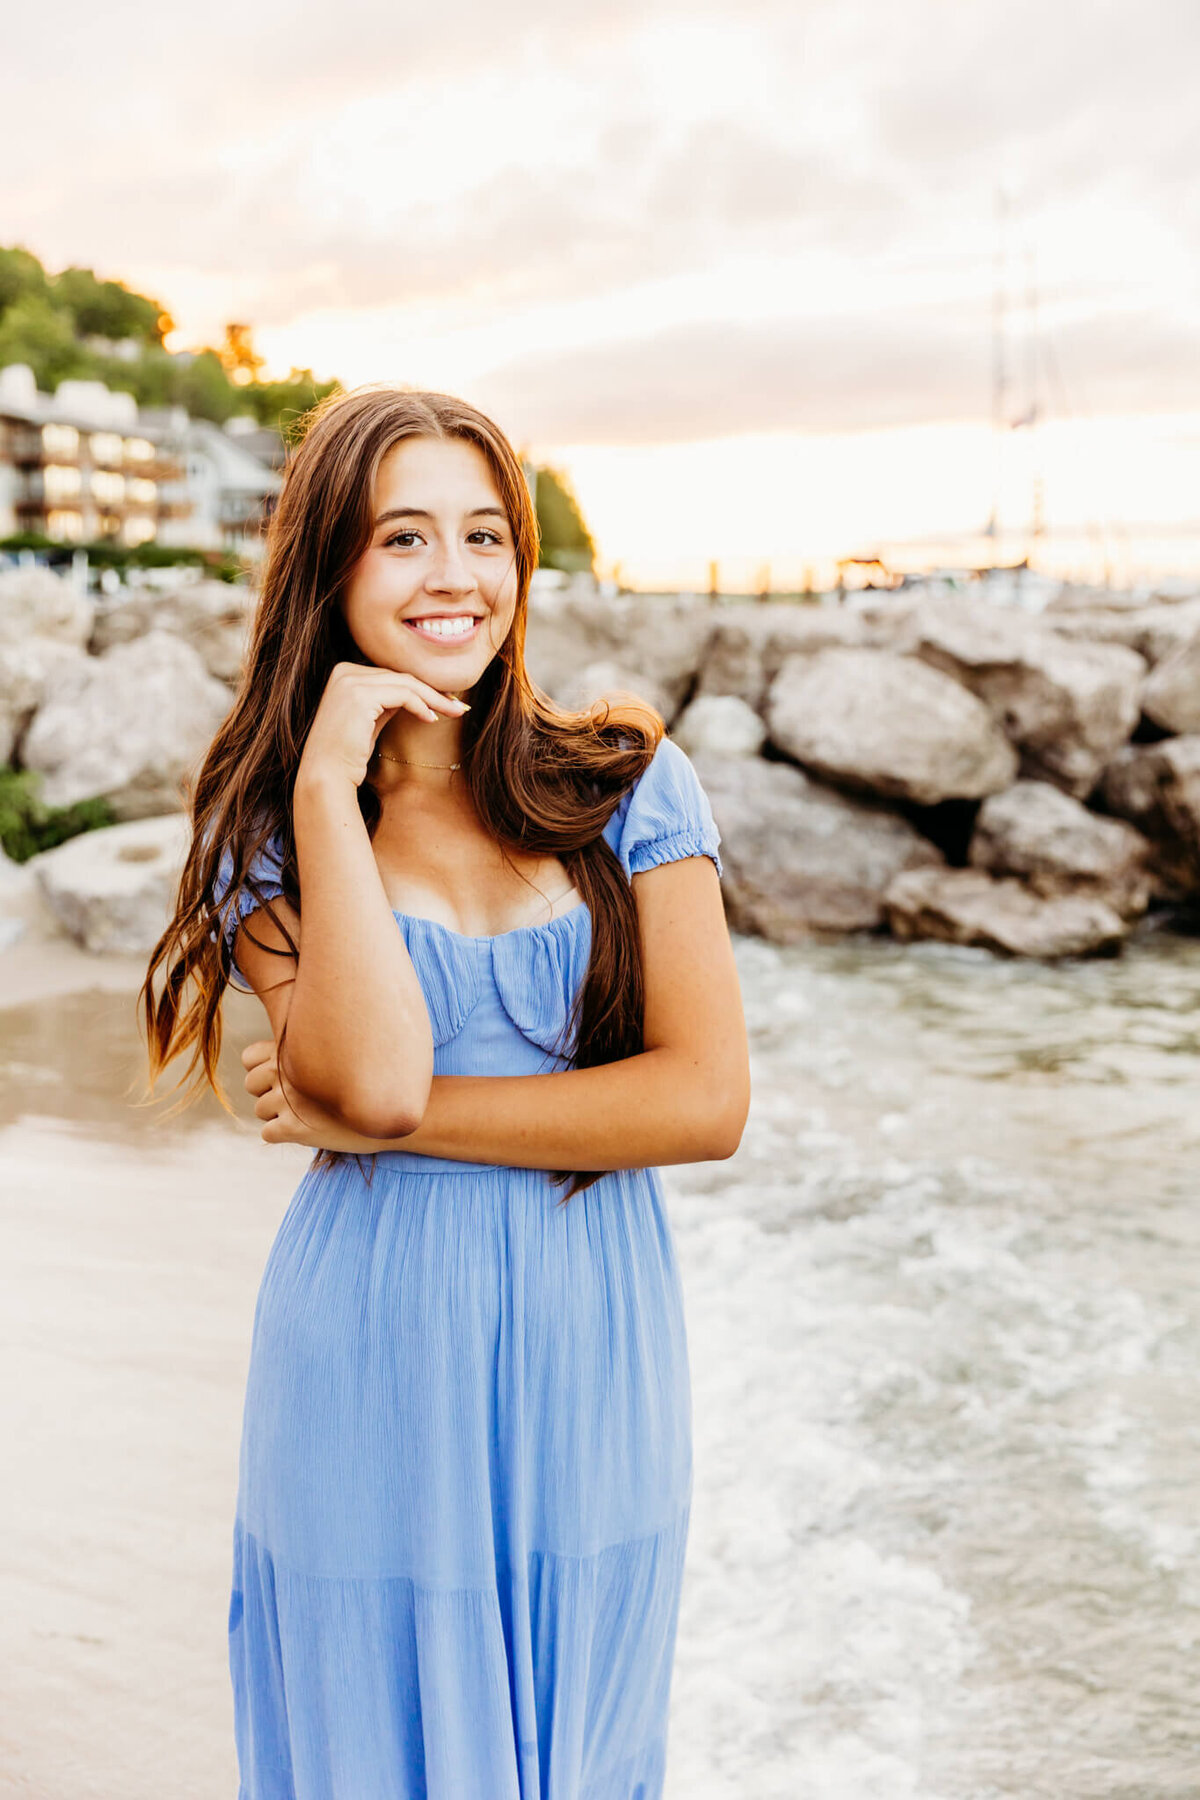 high school senior girl standing and resting chin on hand as she enjoys her senior photo experience